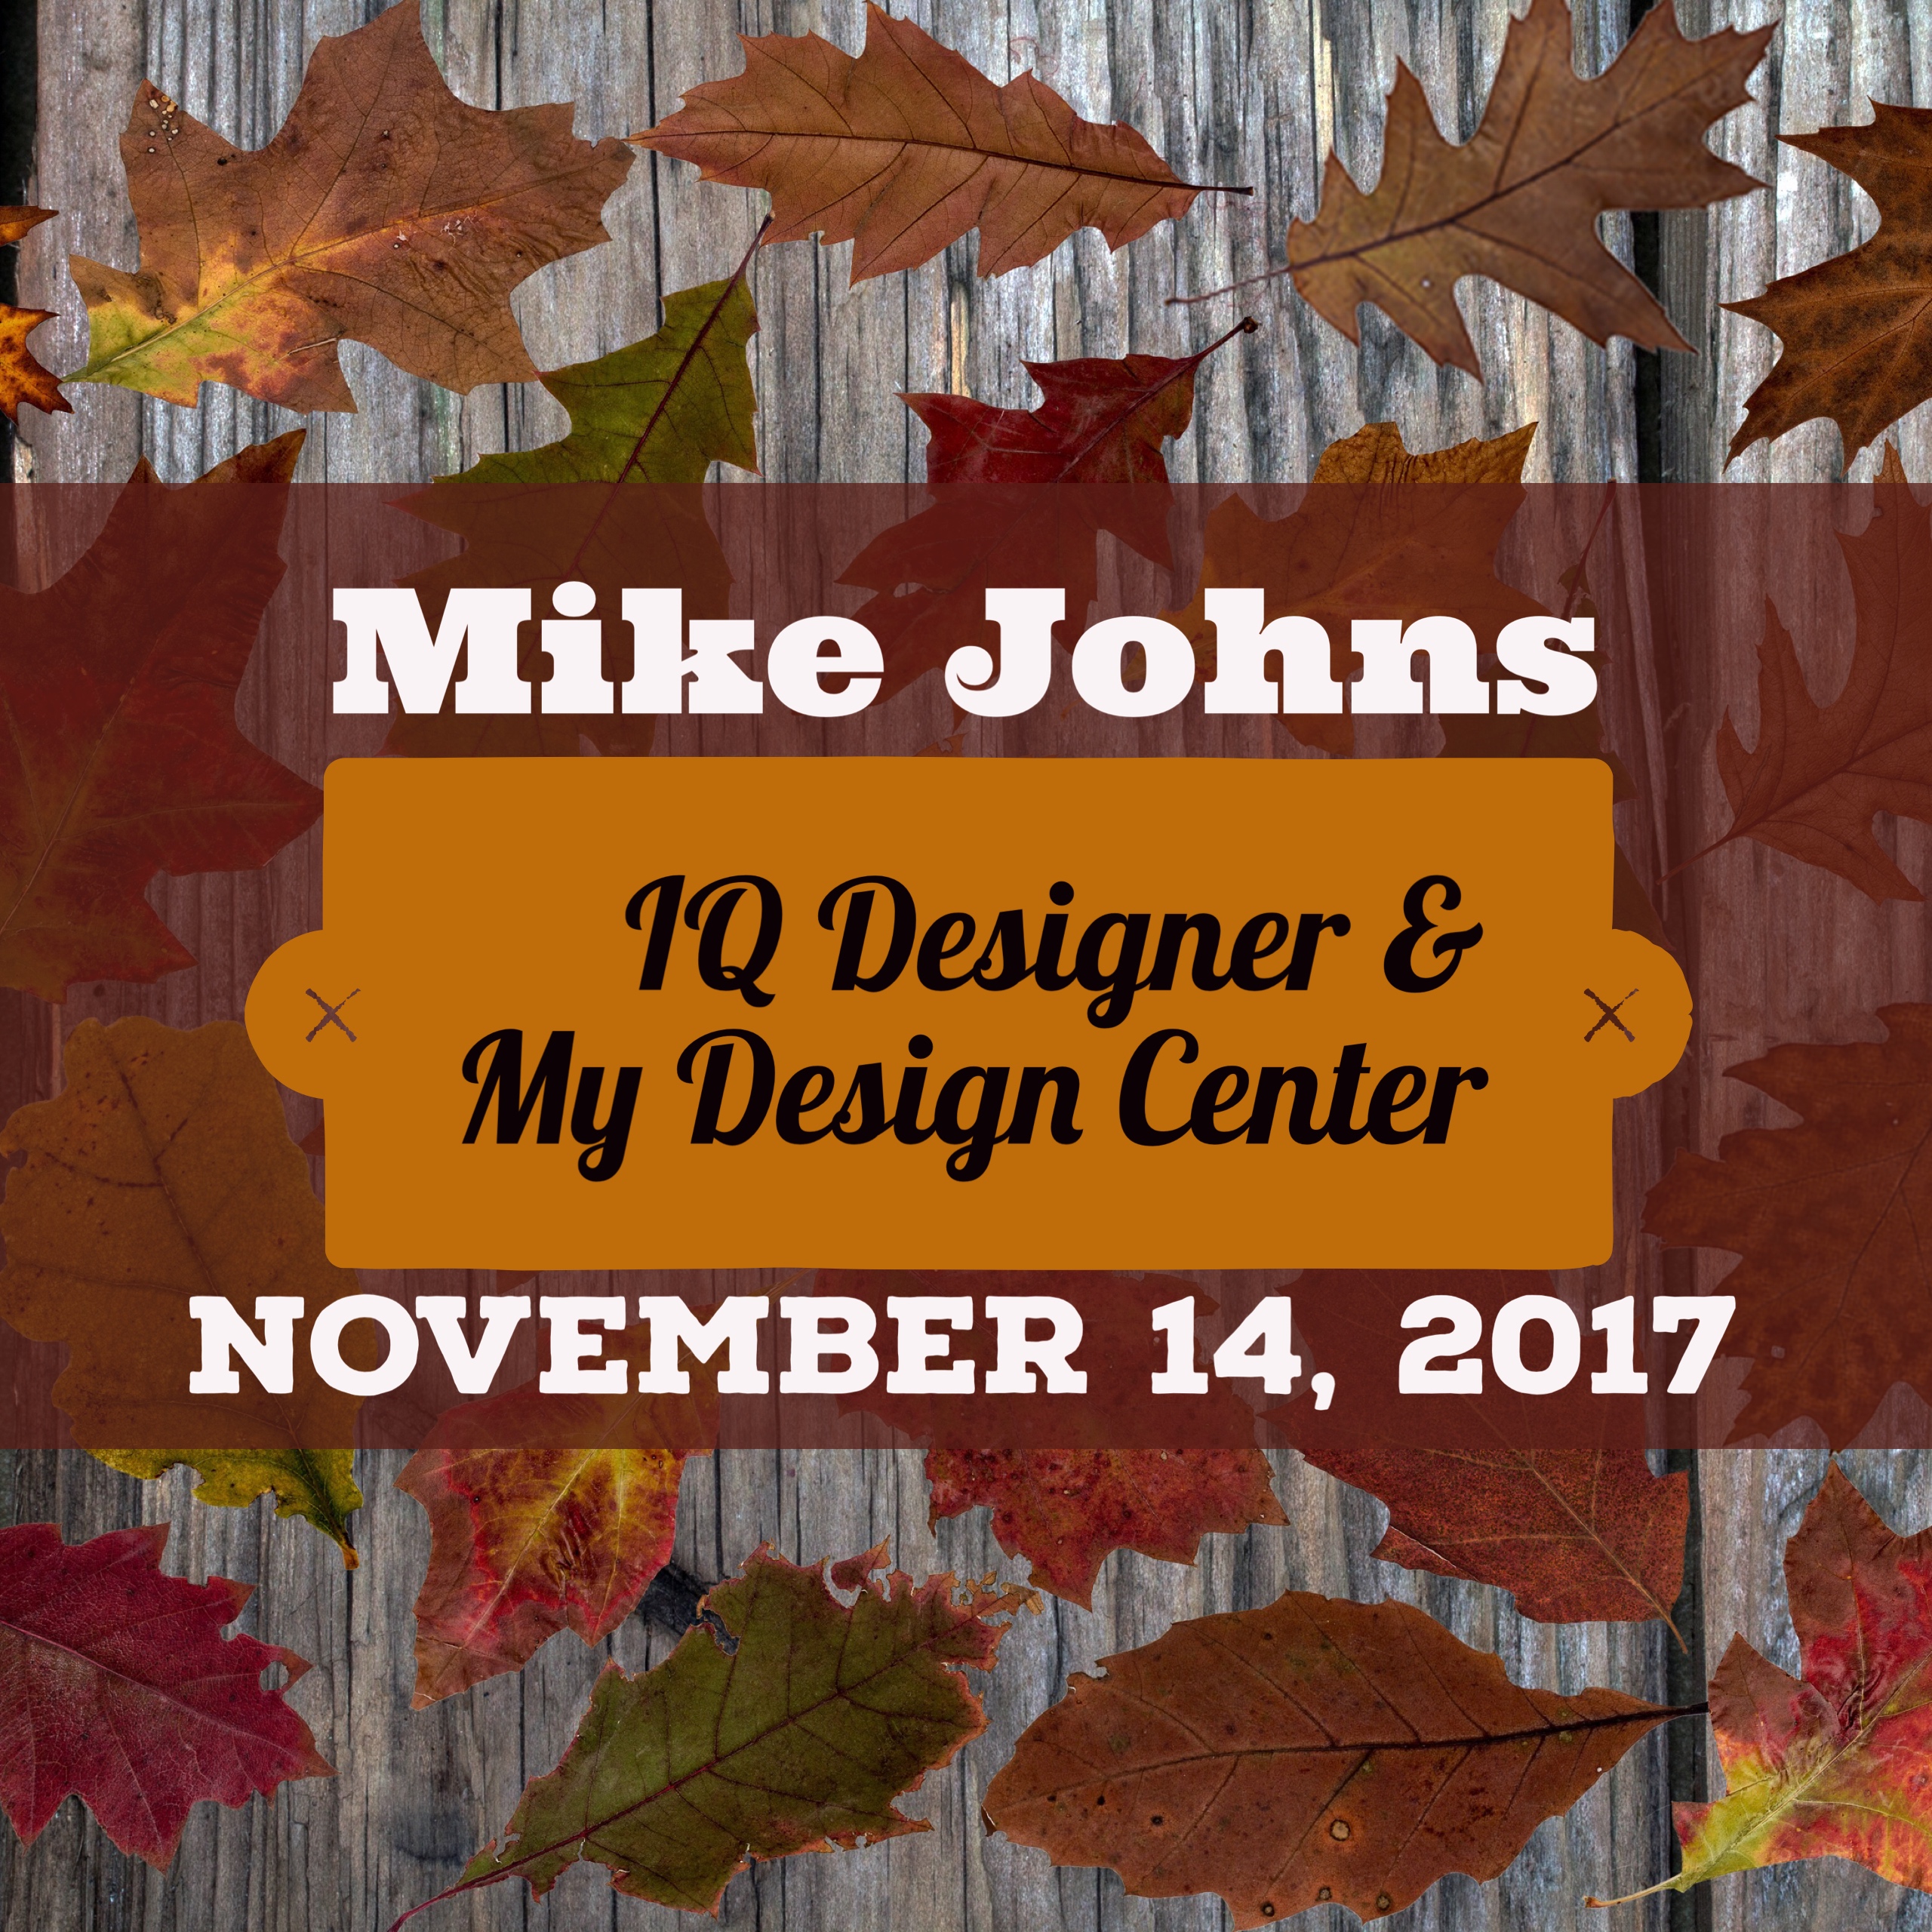 Mike-Johns-IQ-and-My-Design-Center-Class